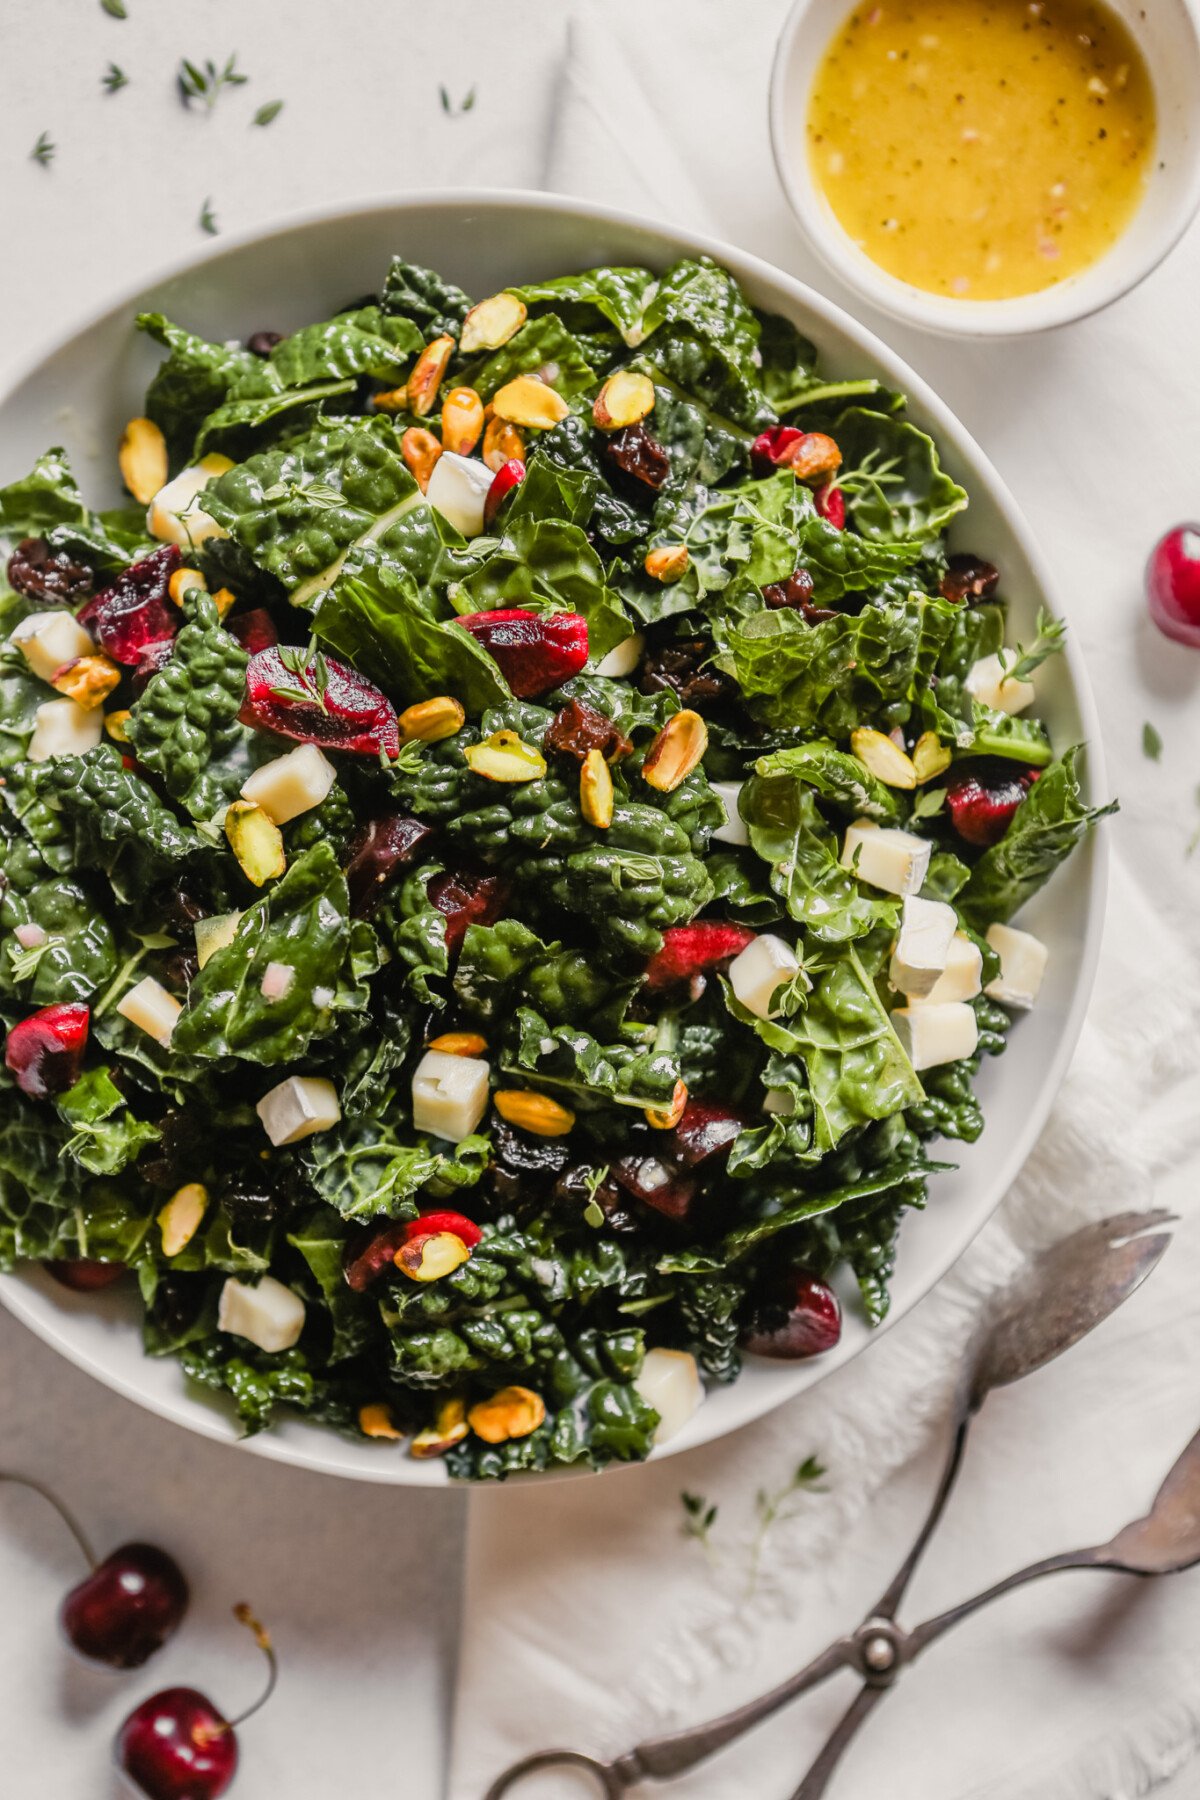 Photograph of a kale salad with cherries and pistachios in a white bowl on a blue table